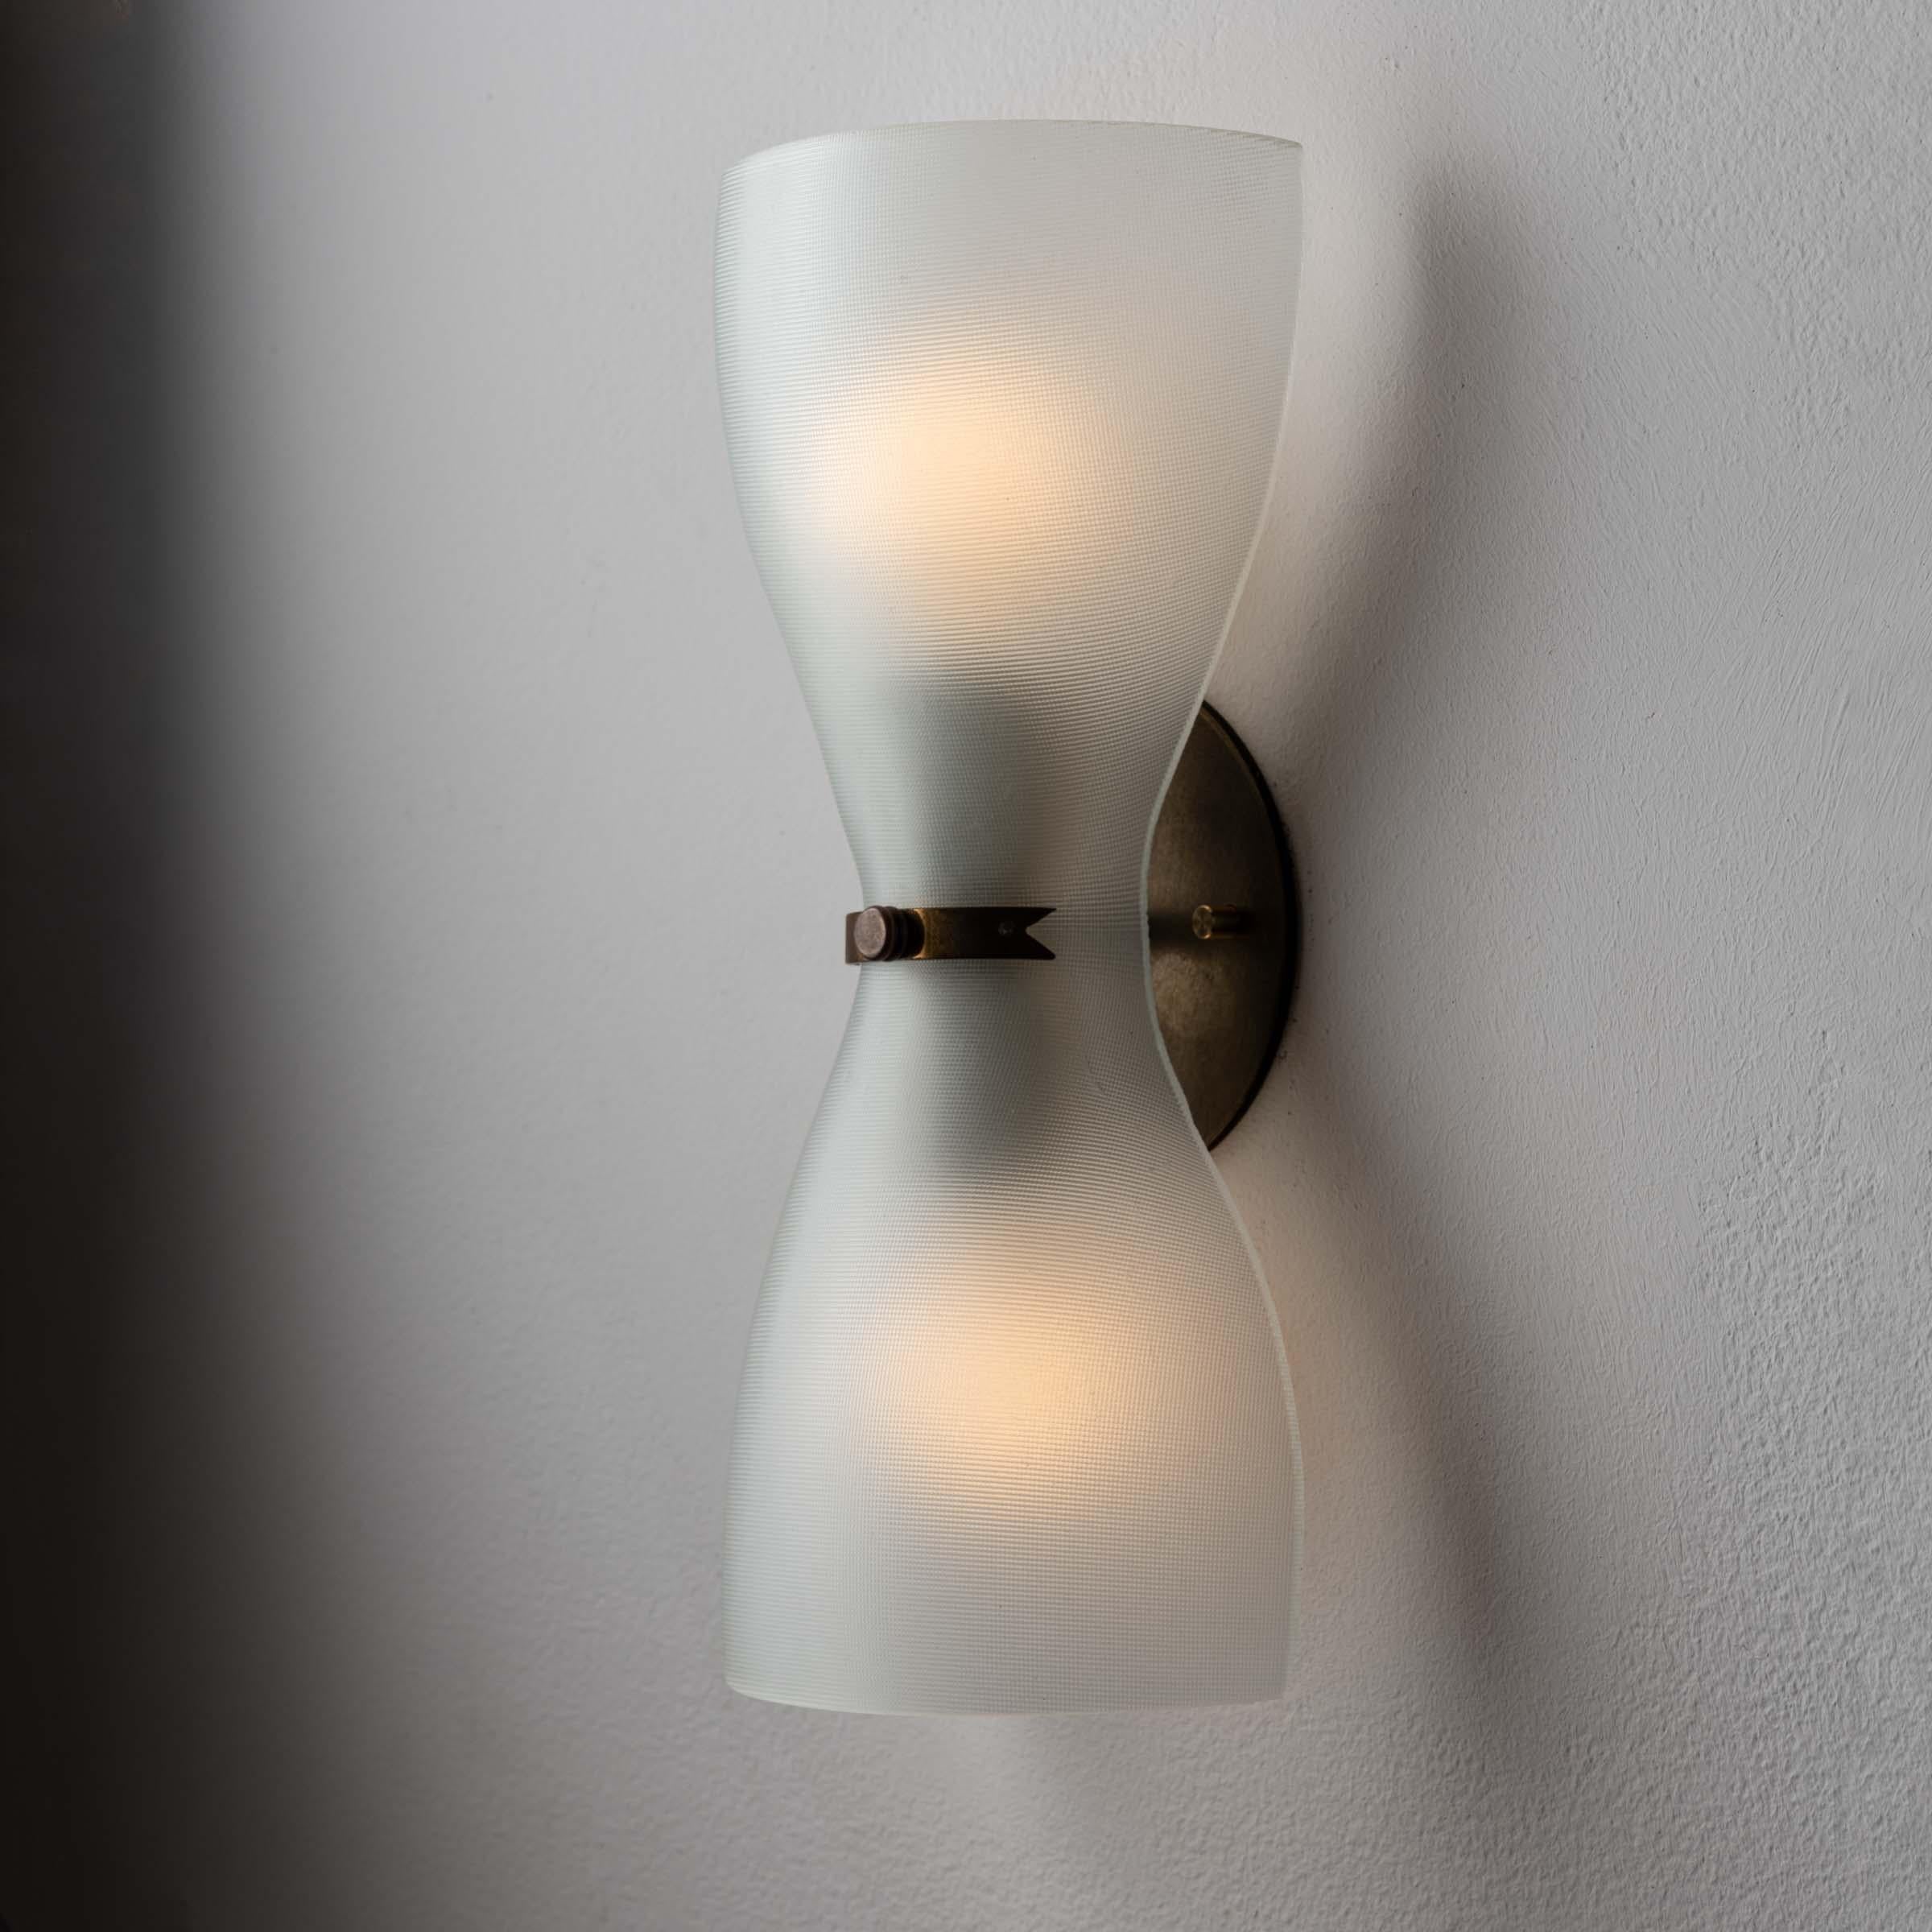 Mid-20th Century Pair of Sconces by Pietro Chiesa for Fontana Arte